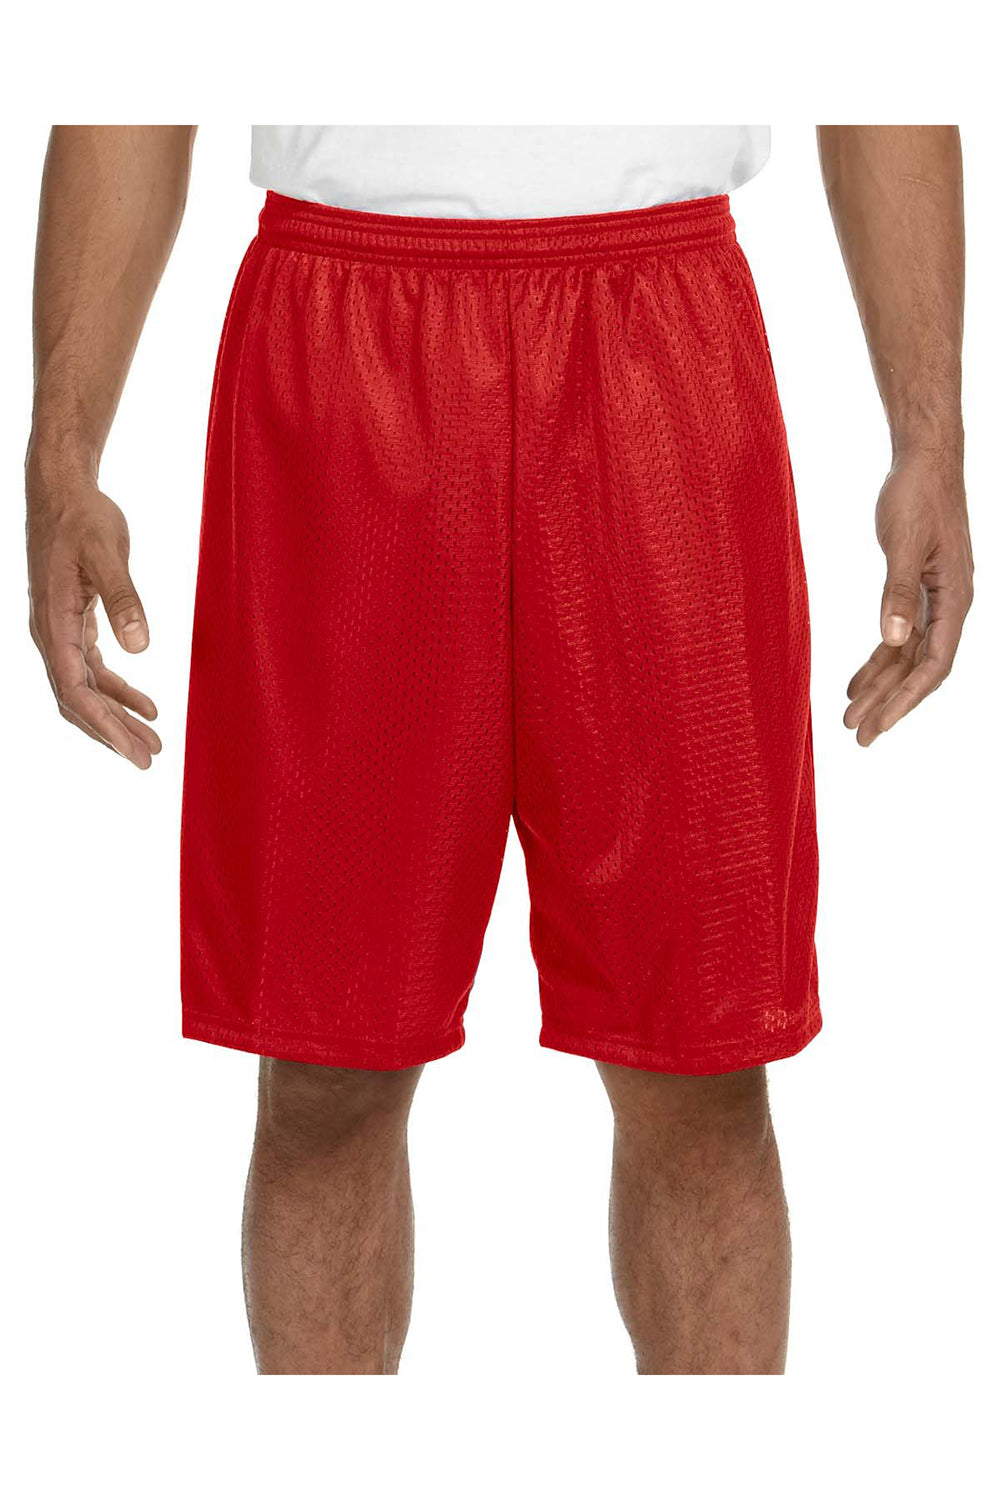 A4 N5296 Mens Moisture Wicking Tricot Mesh Shorts Scarlet Red Model Front